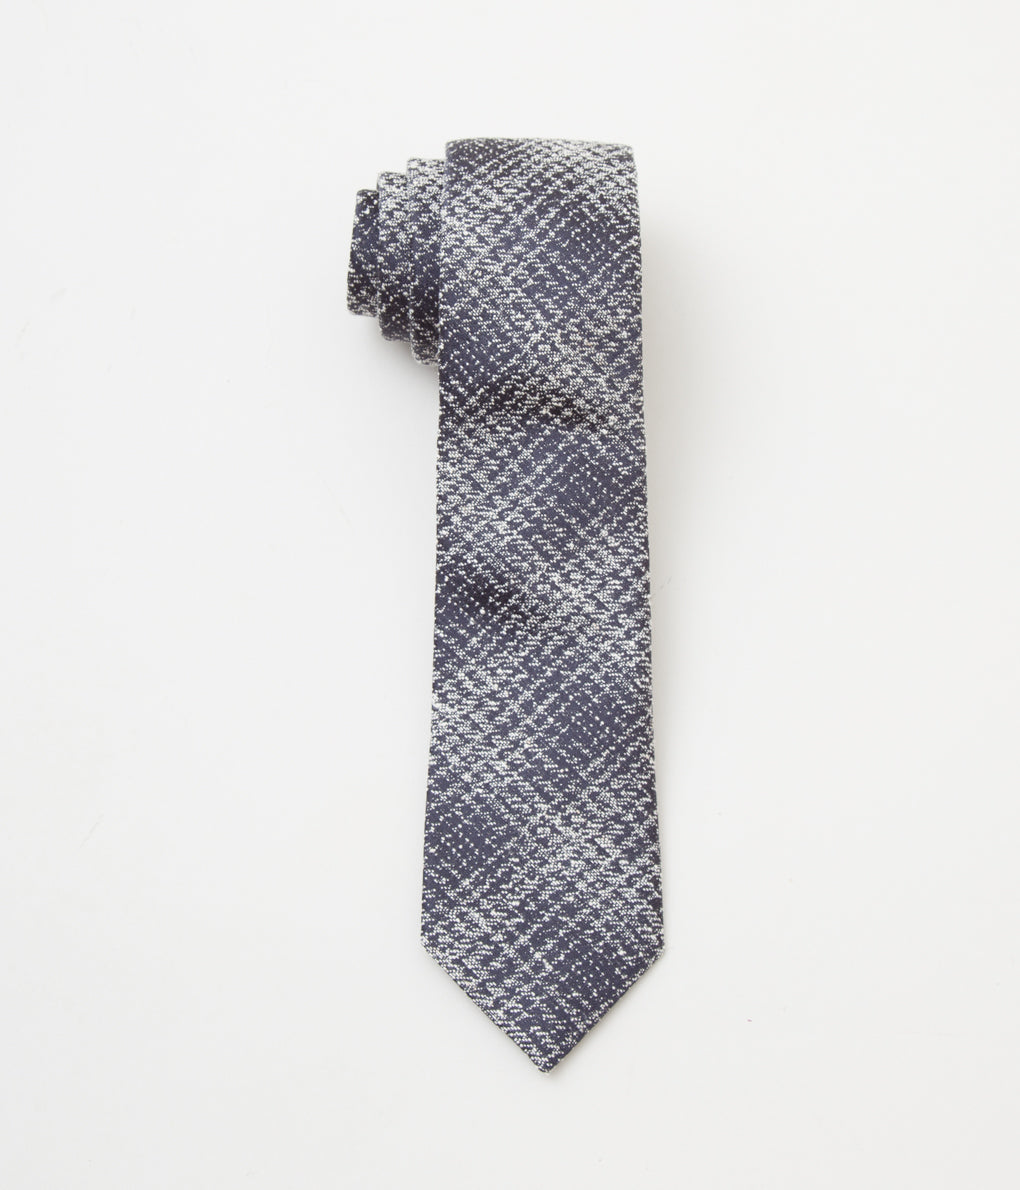 FINE AND DANDY "TIES "(NAVY SHADOW PAID WOOL BLEND)